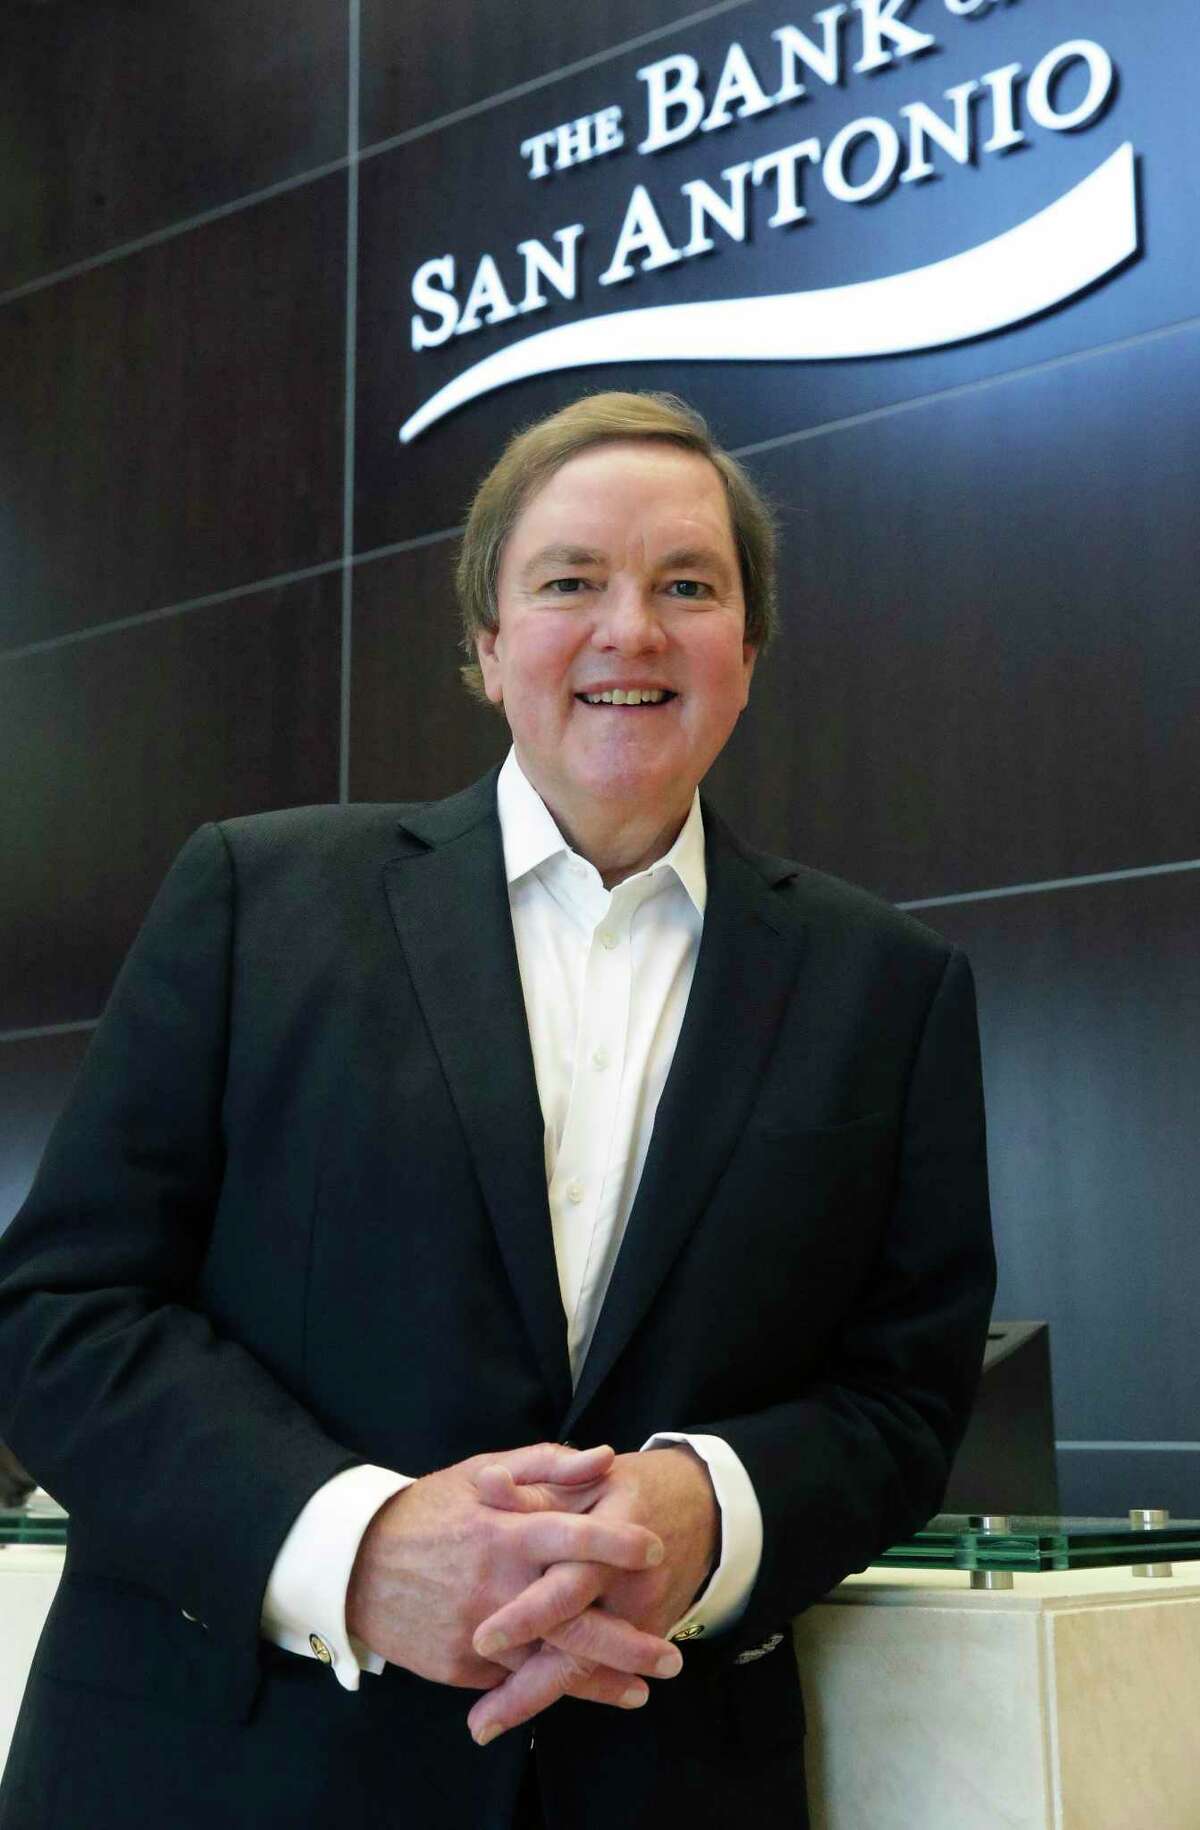 J. Bruce Bugg, Jr. is chairman of the The Bank of San Antonio.